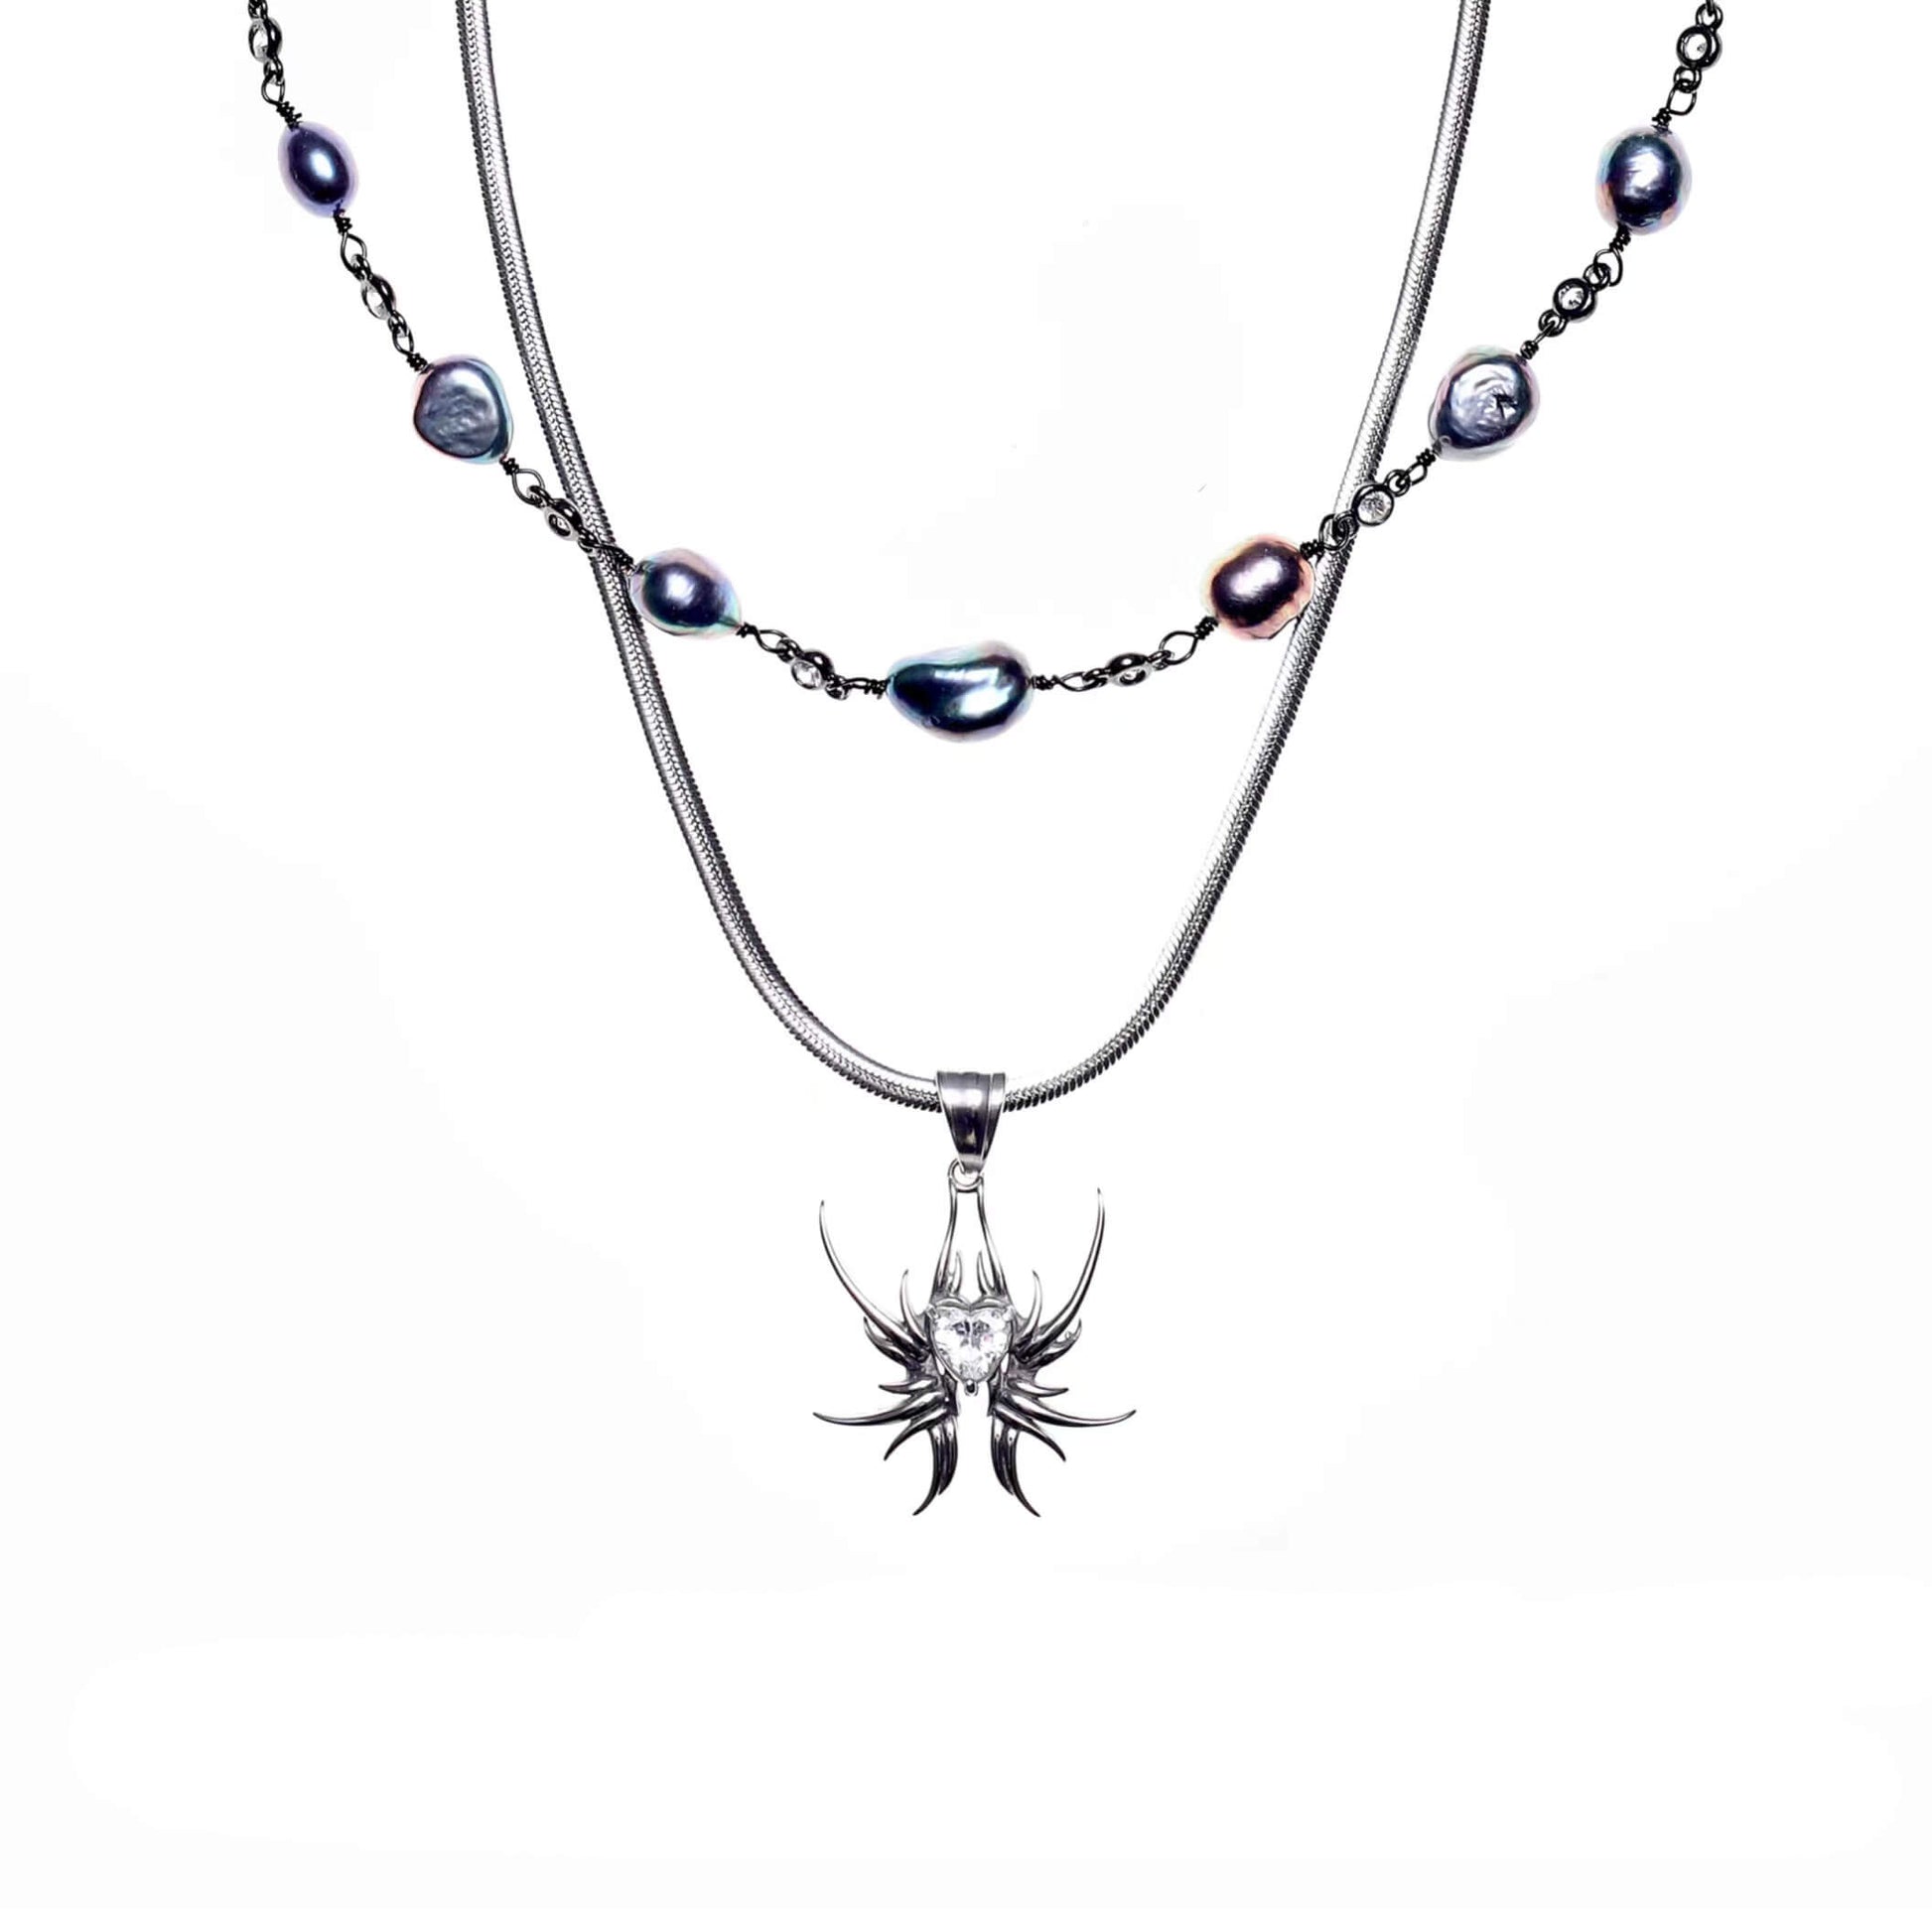 Cosmic Energy Fluctuation Necklace | Buy at Khanie